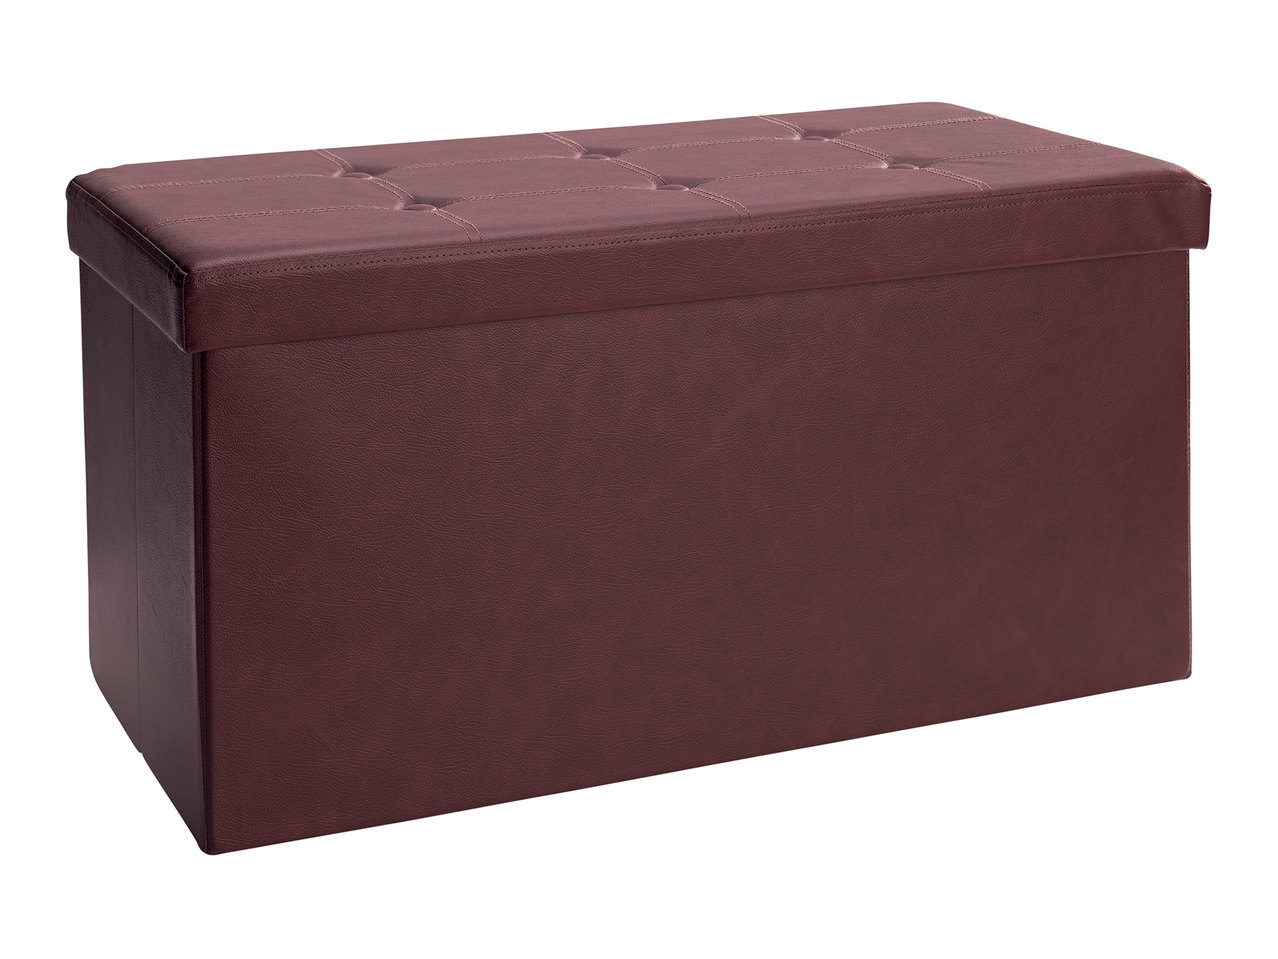 Livarno Living Faux Leather Storage Bench1